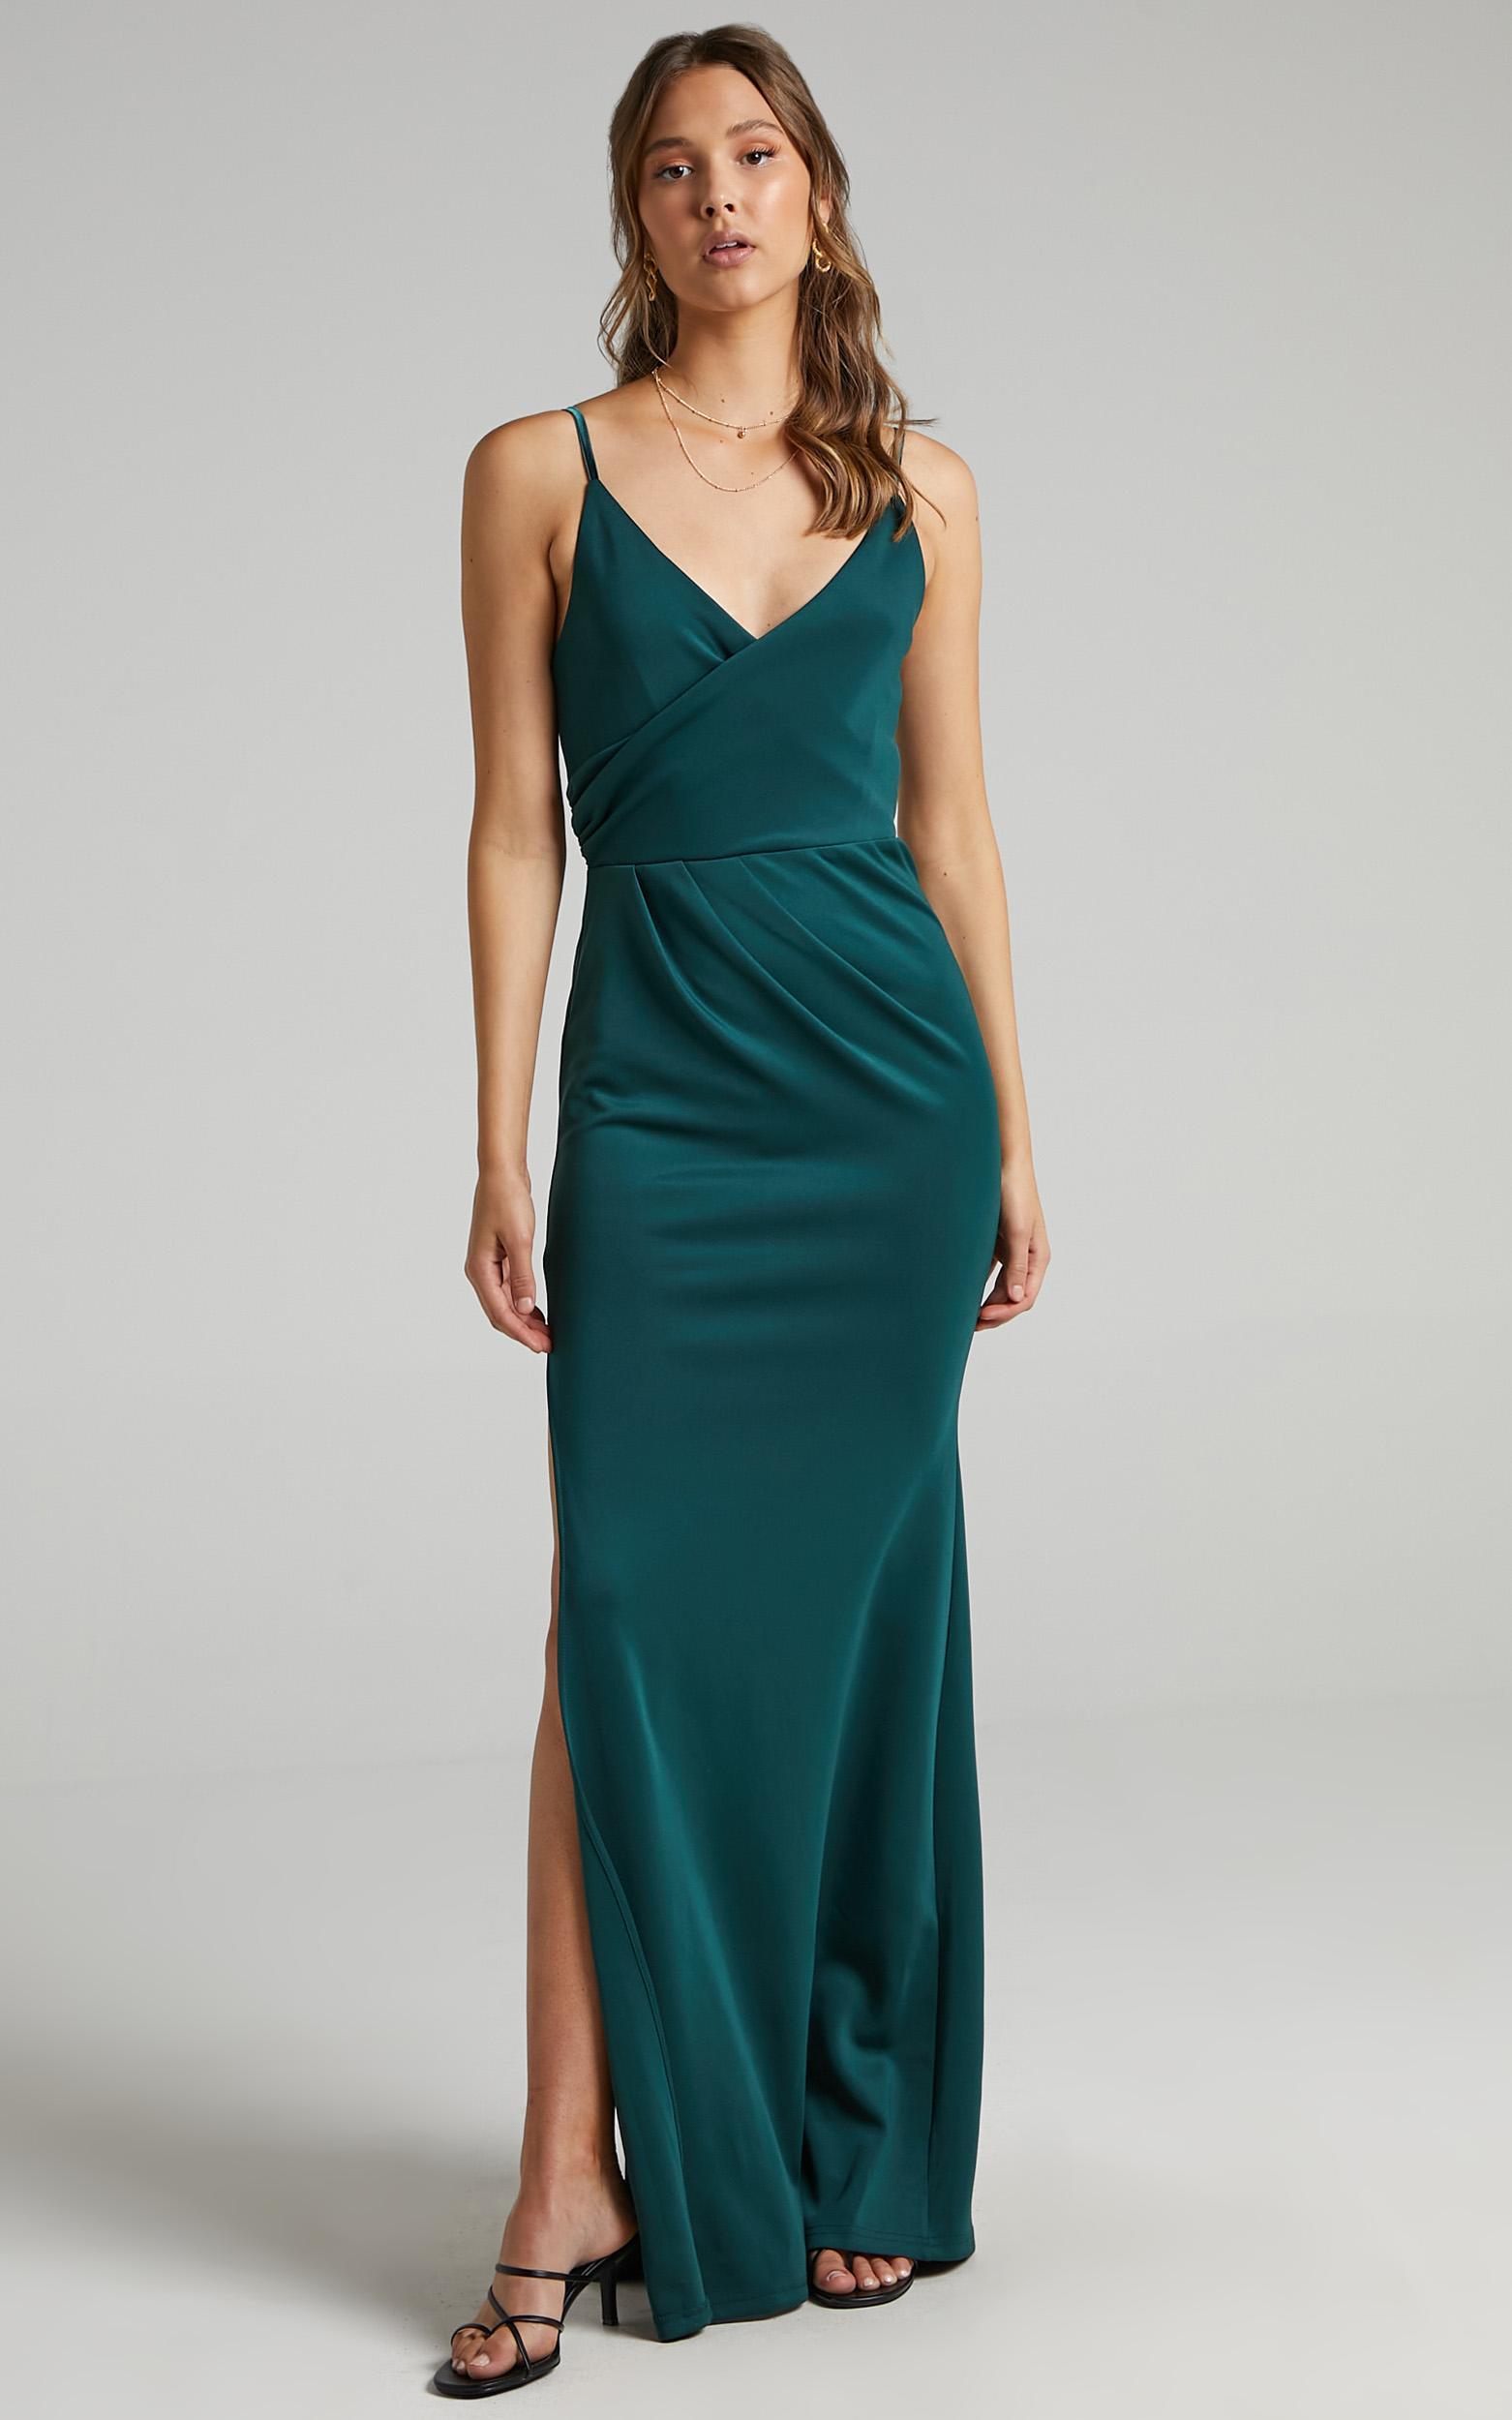 Linking Love Slip Maxi Dress in Emerald - 04, GRN1, hi-res image number null